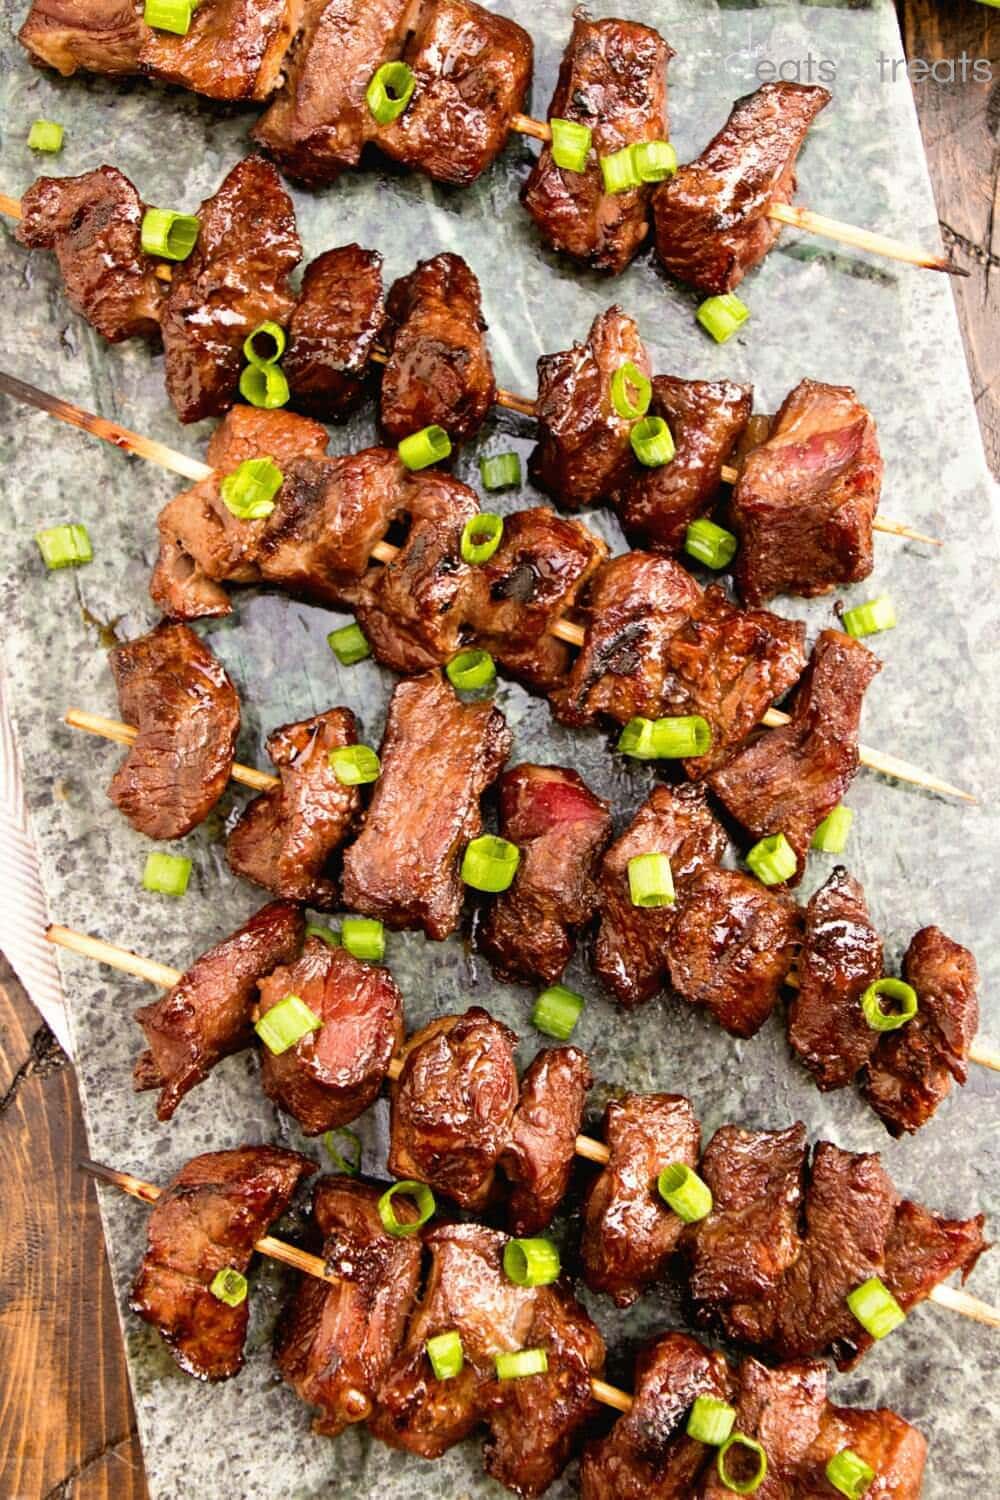 Asian Steak Kebabs ~ Tender, Juicy Steak Bites in a Delicious Asian Marinade! The Perfect Quick & Easy Recipe to Fire Up the Grill With! 